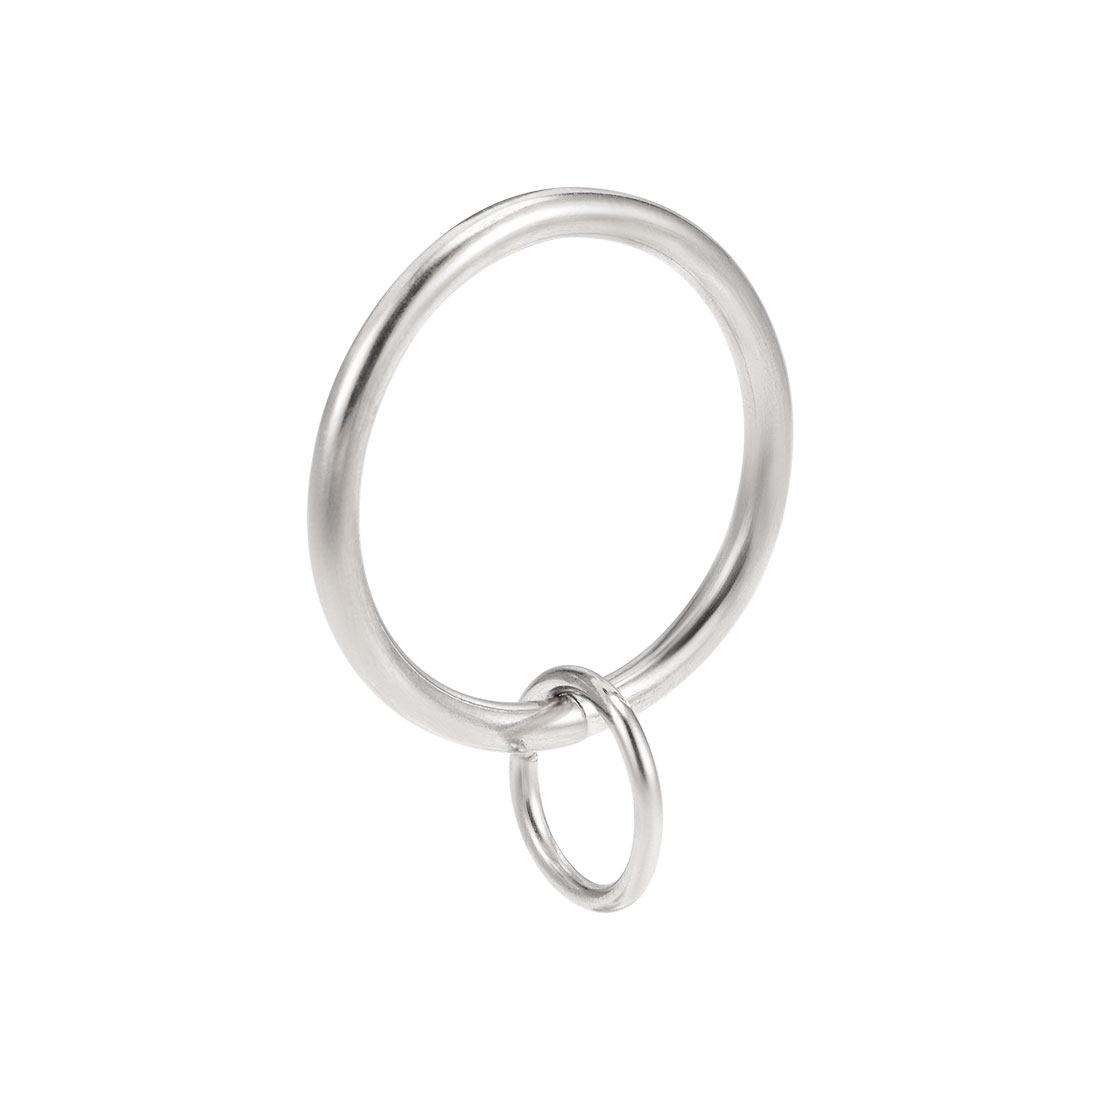 Unique Bargains Curtain Ring 32mm Inner Dia Drapery Ring for Curtain Rods Silver Tone 14 Pcs